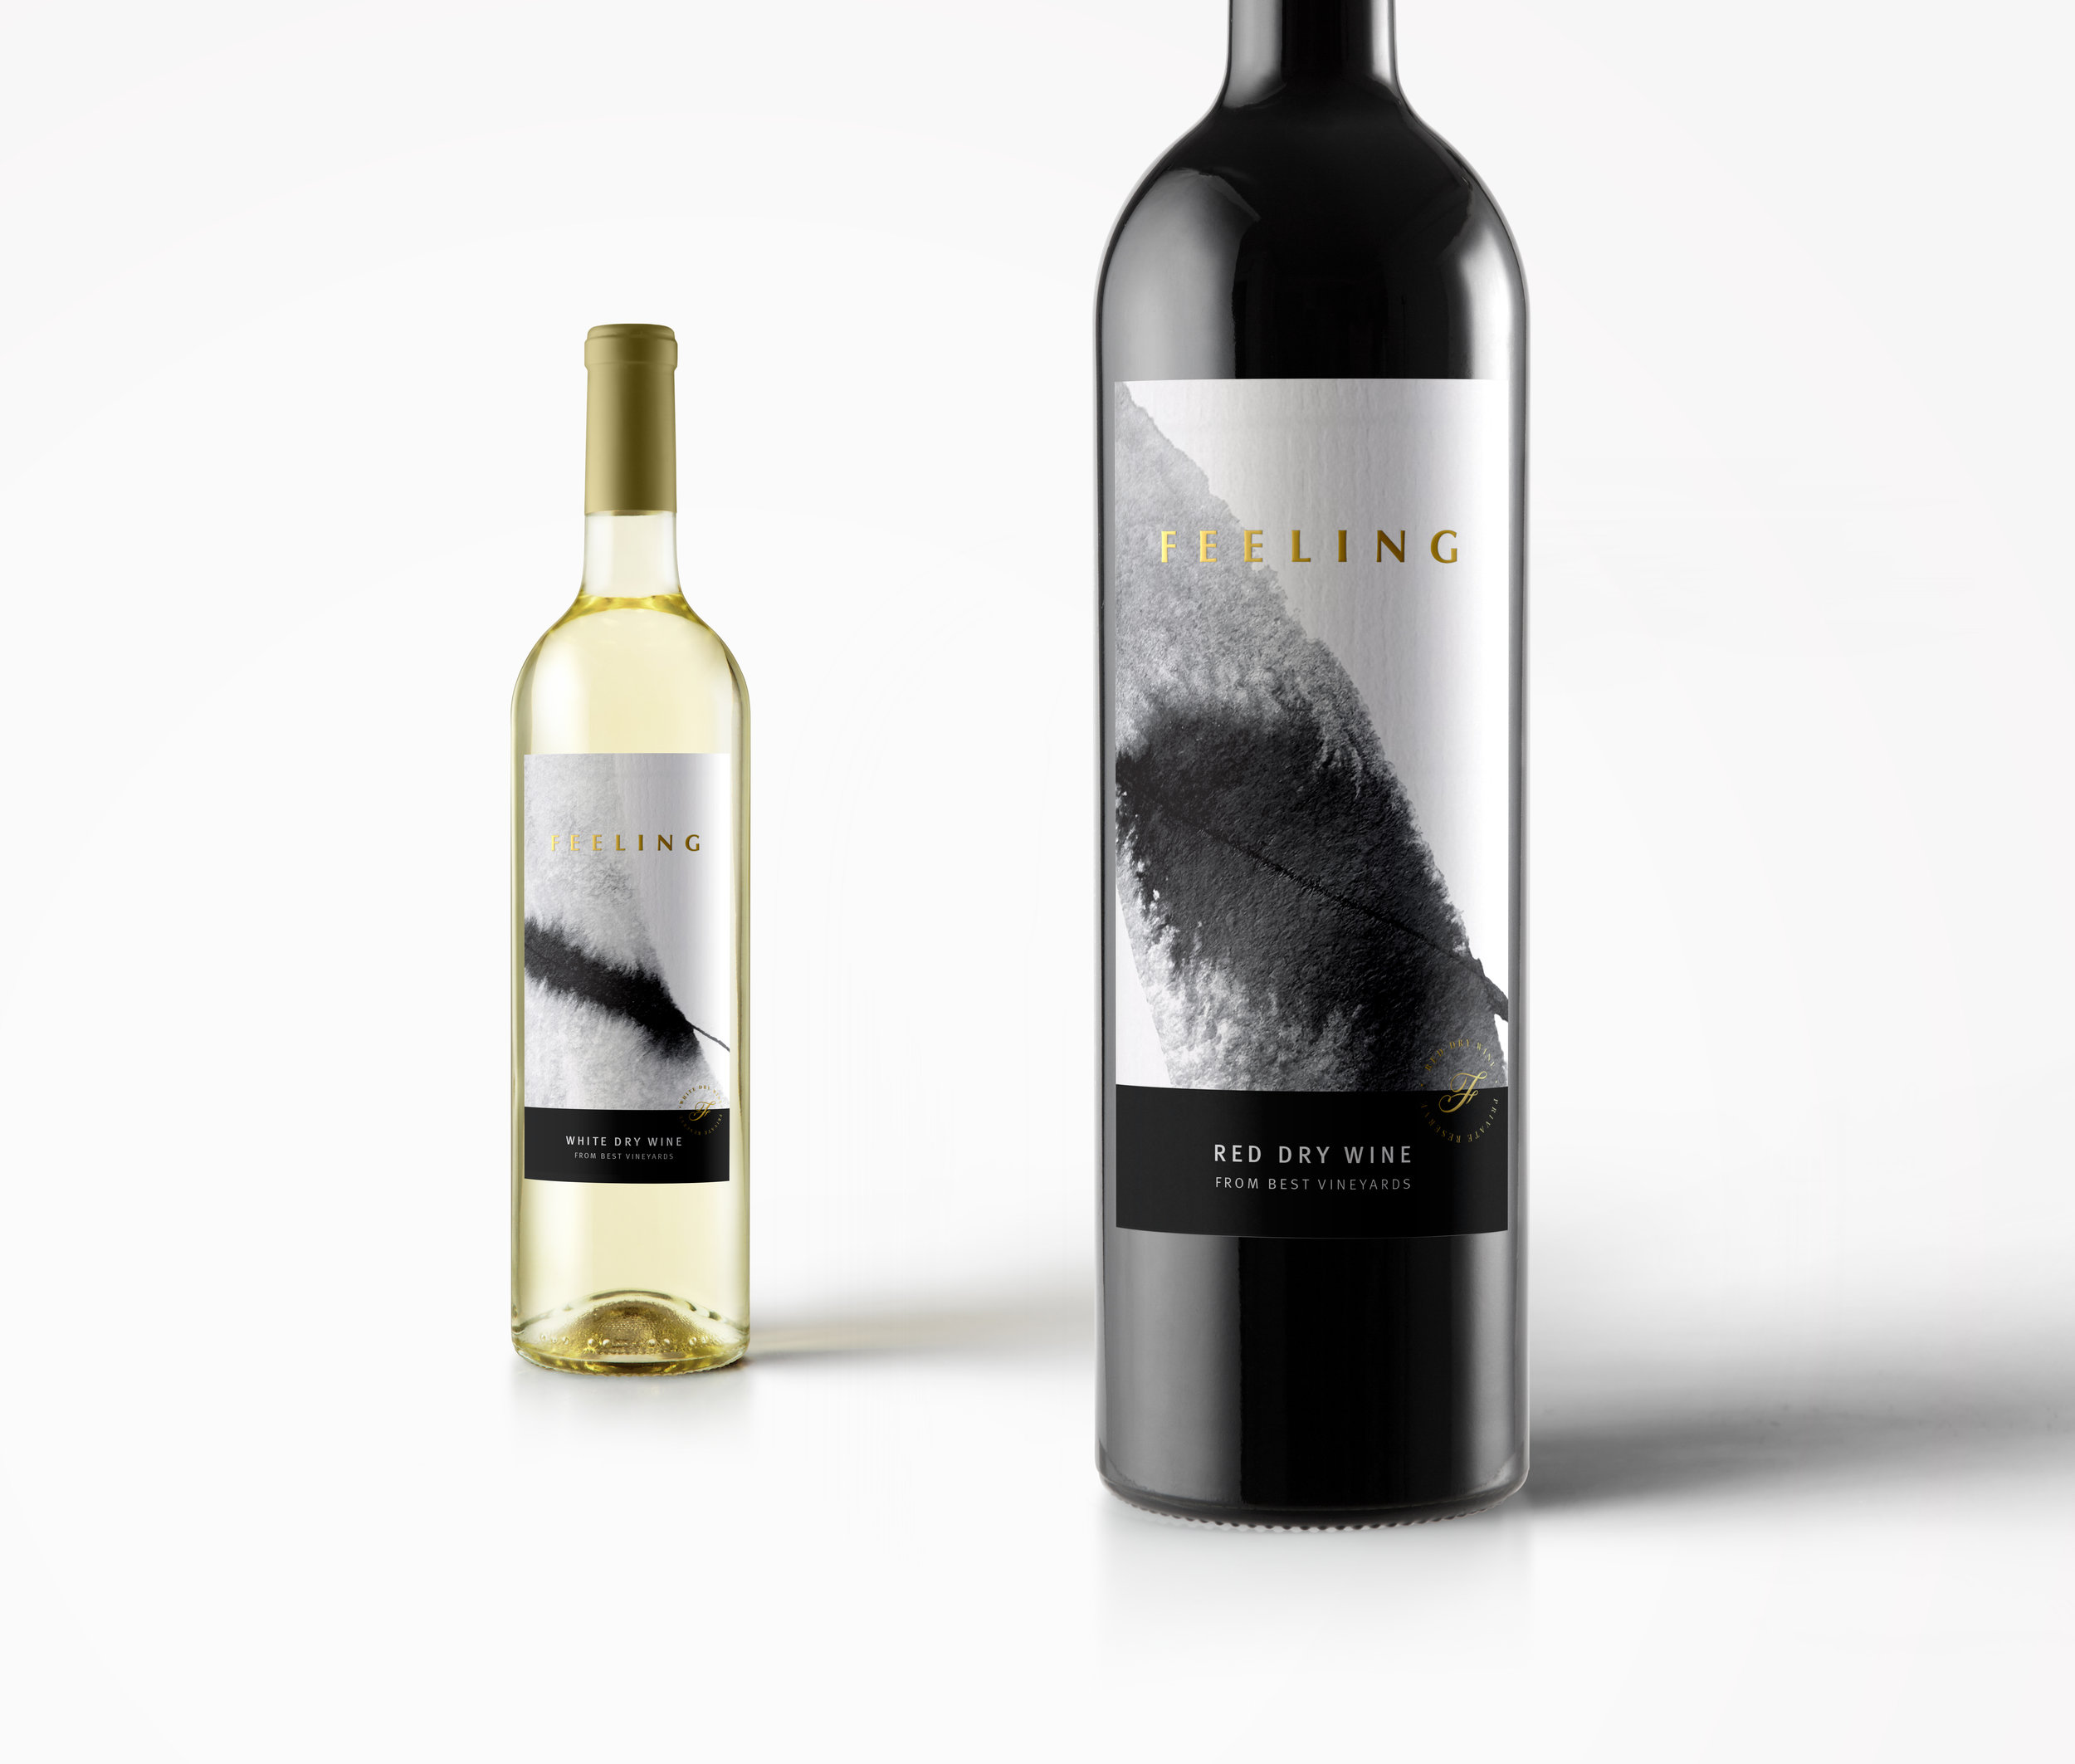 Label Packaging Design for Feeling White and Red Dry Wine